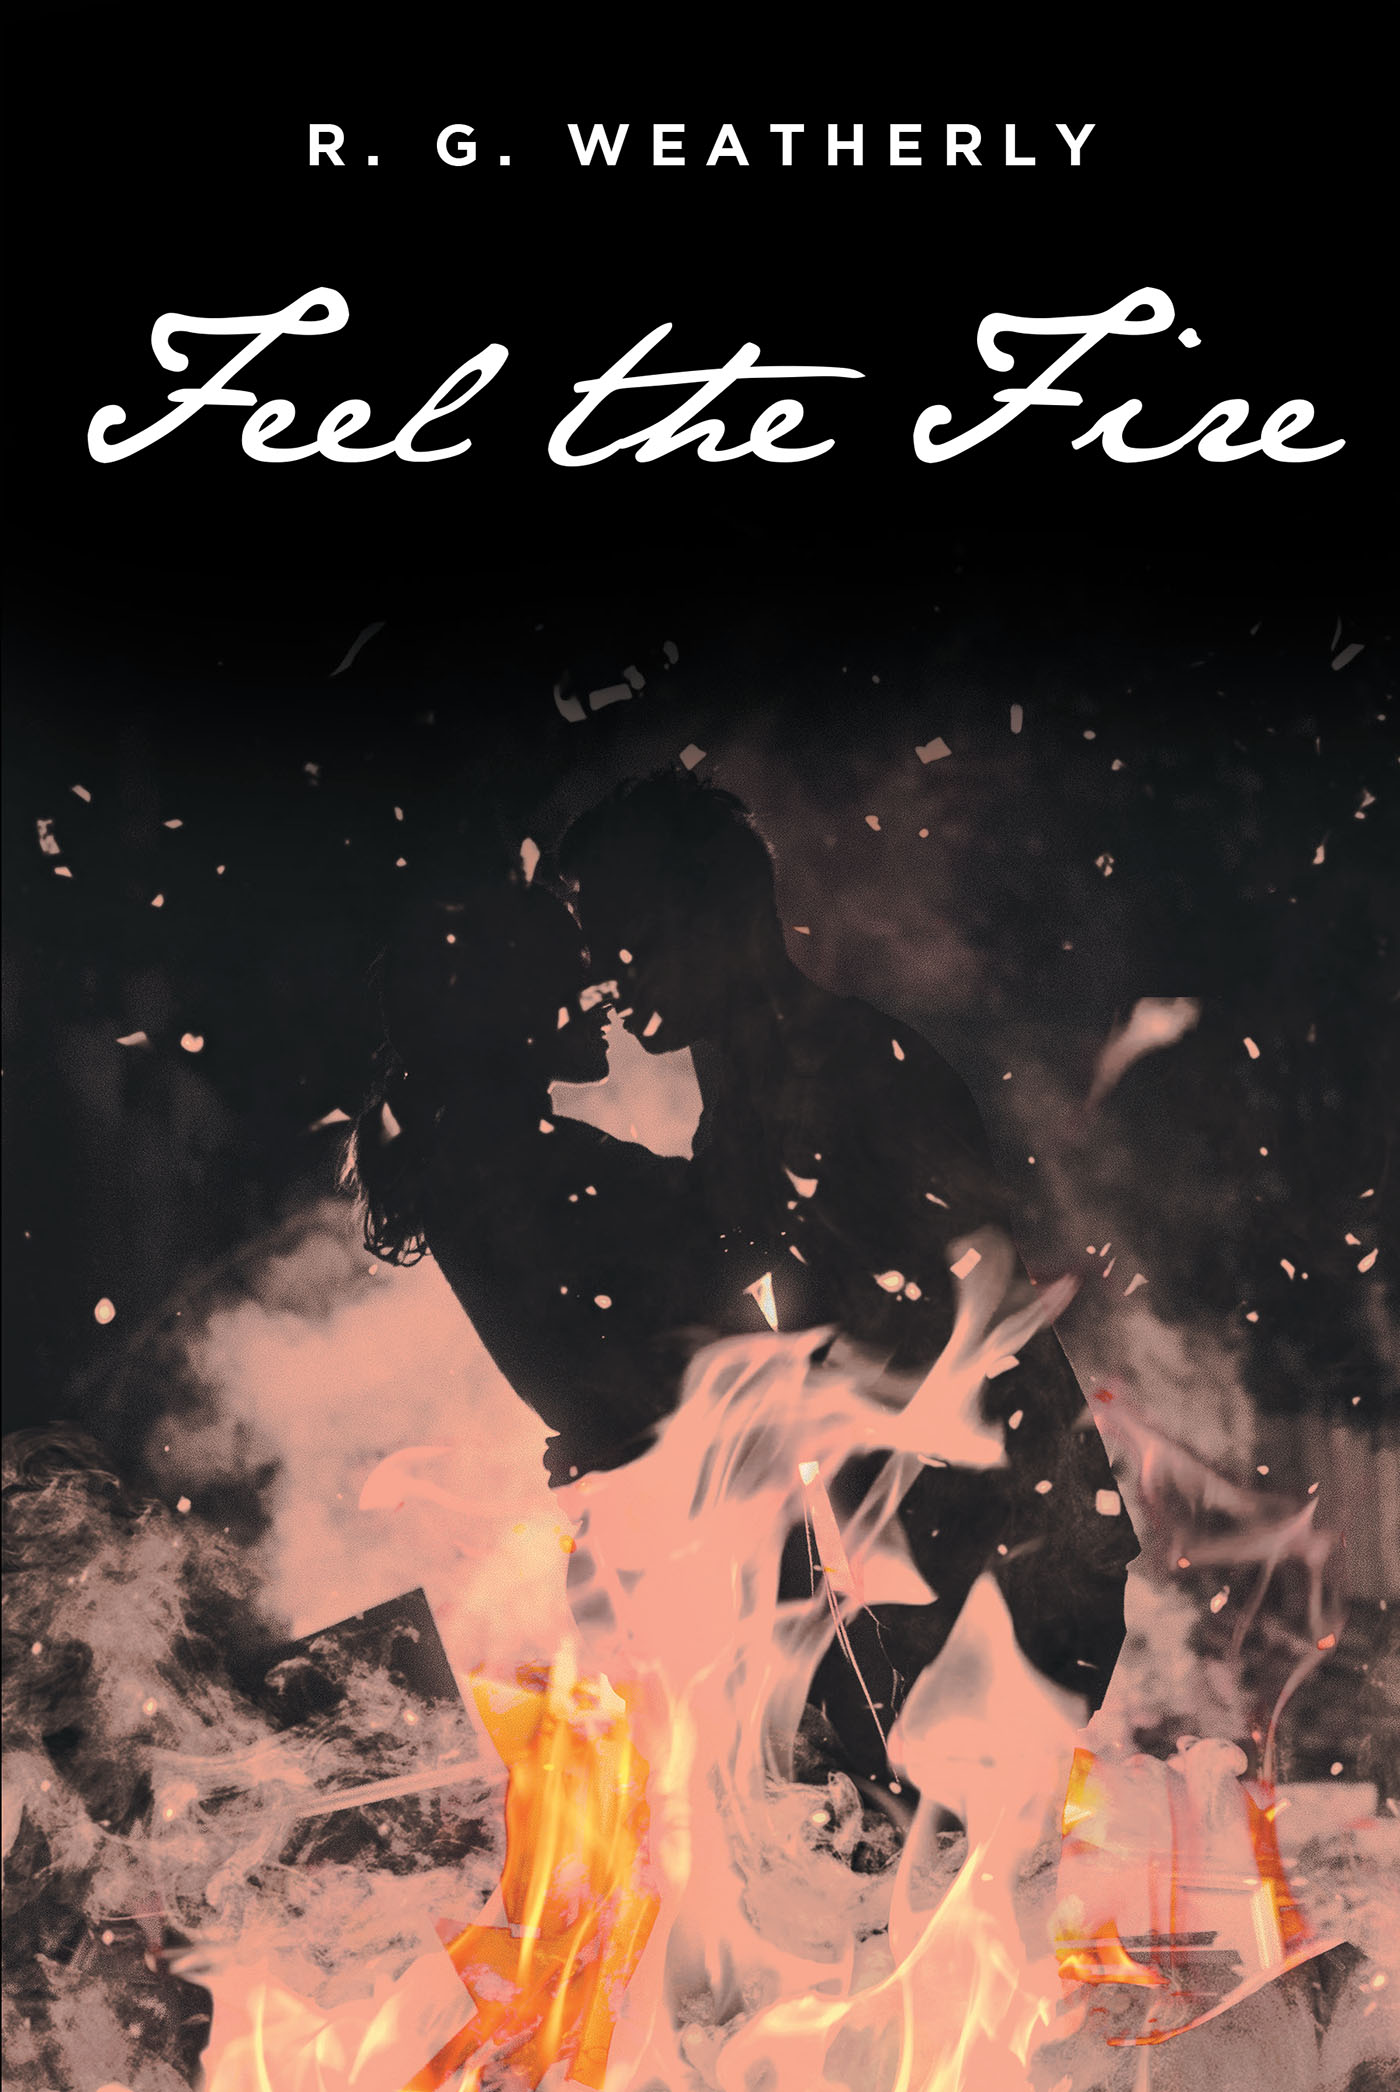 R. G. Weatherly’s New Book, "Feel the Fire," is a Riveting Story of Two Lovers Who Must Fight Tooth and Nail Not Only to be with Each Other, But Also for Their Lives